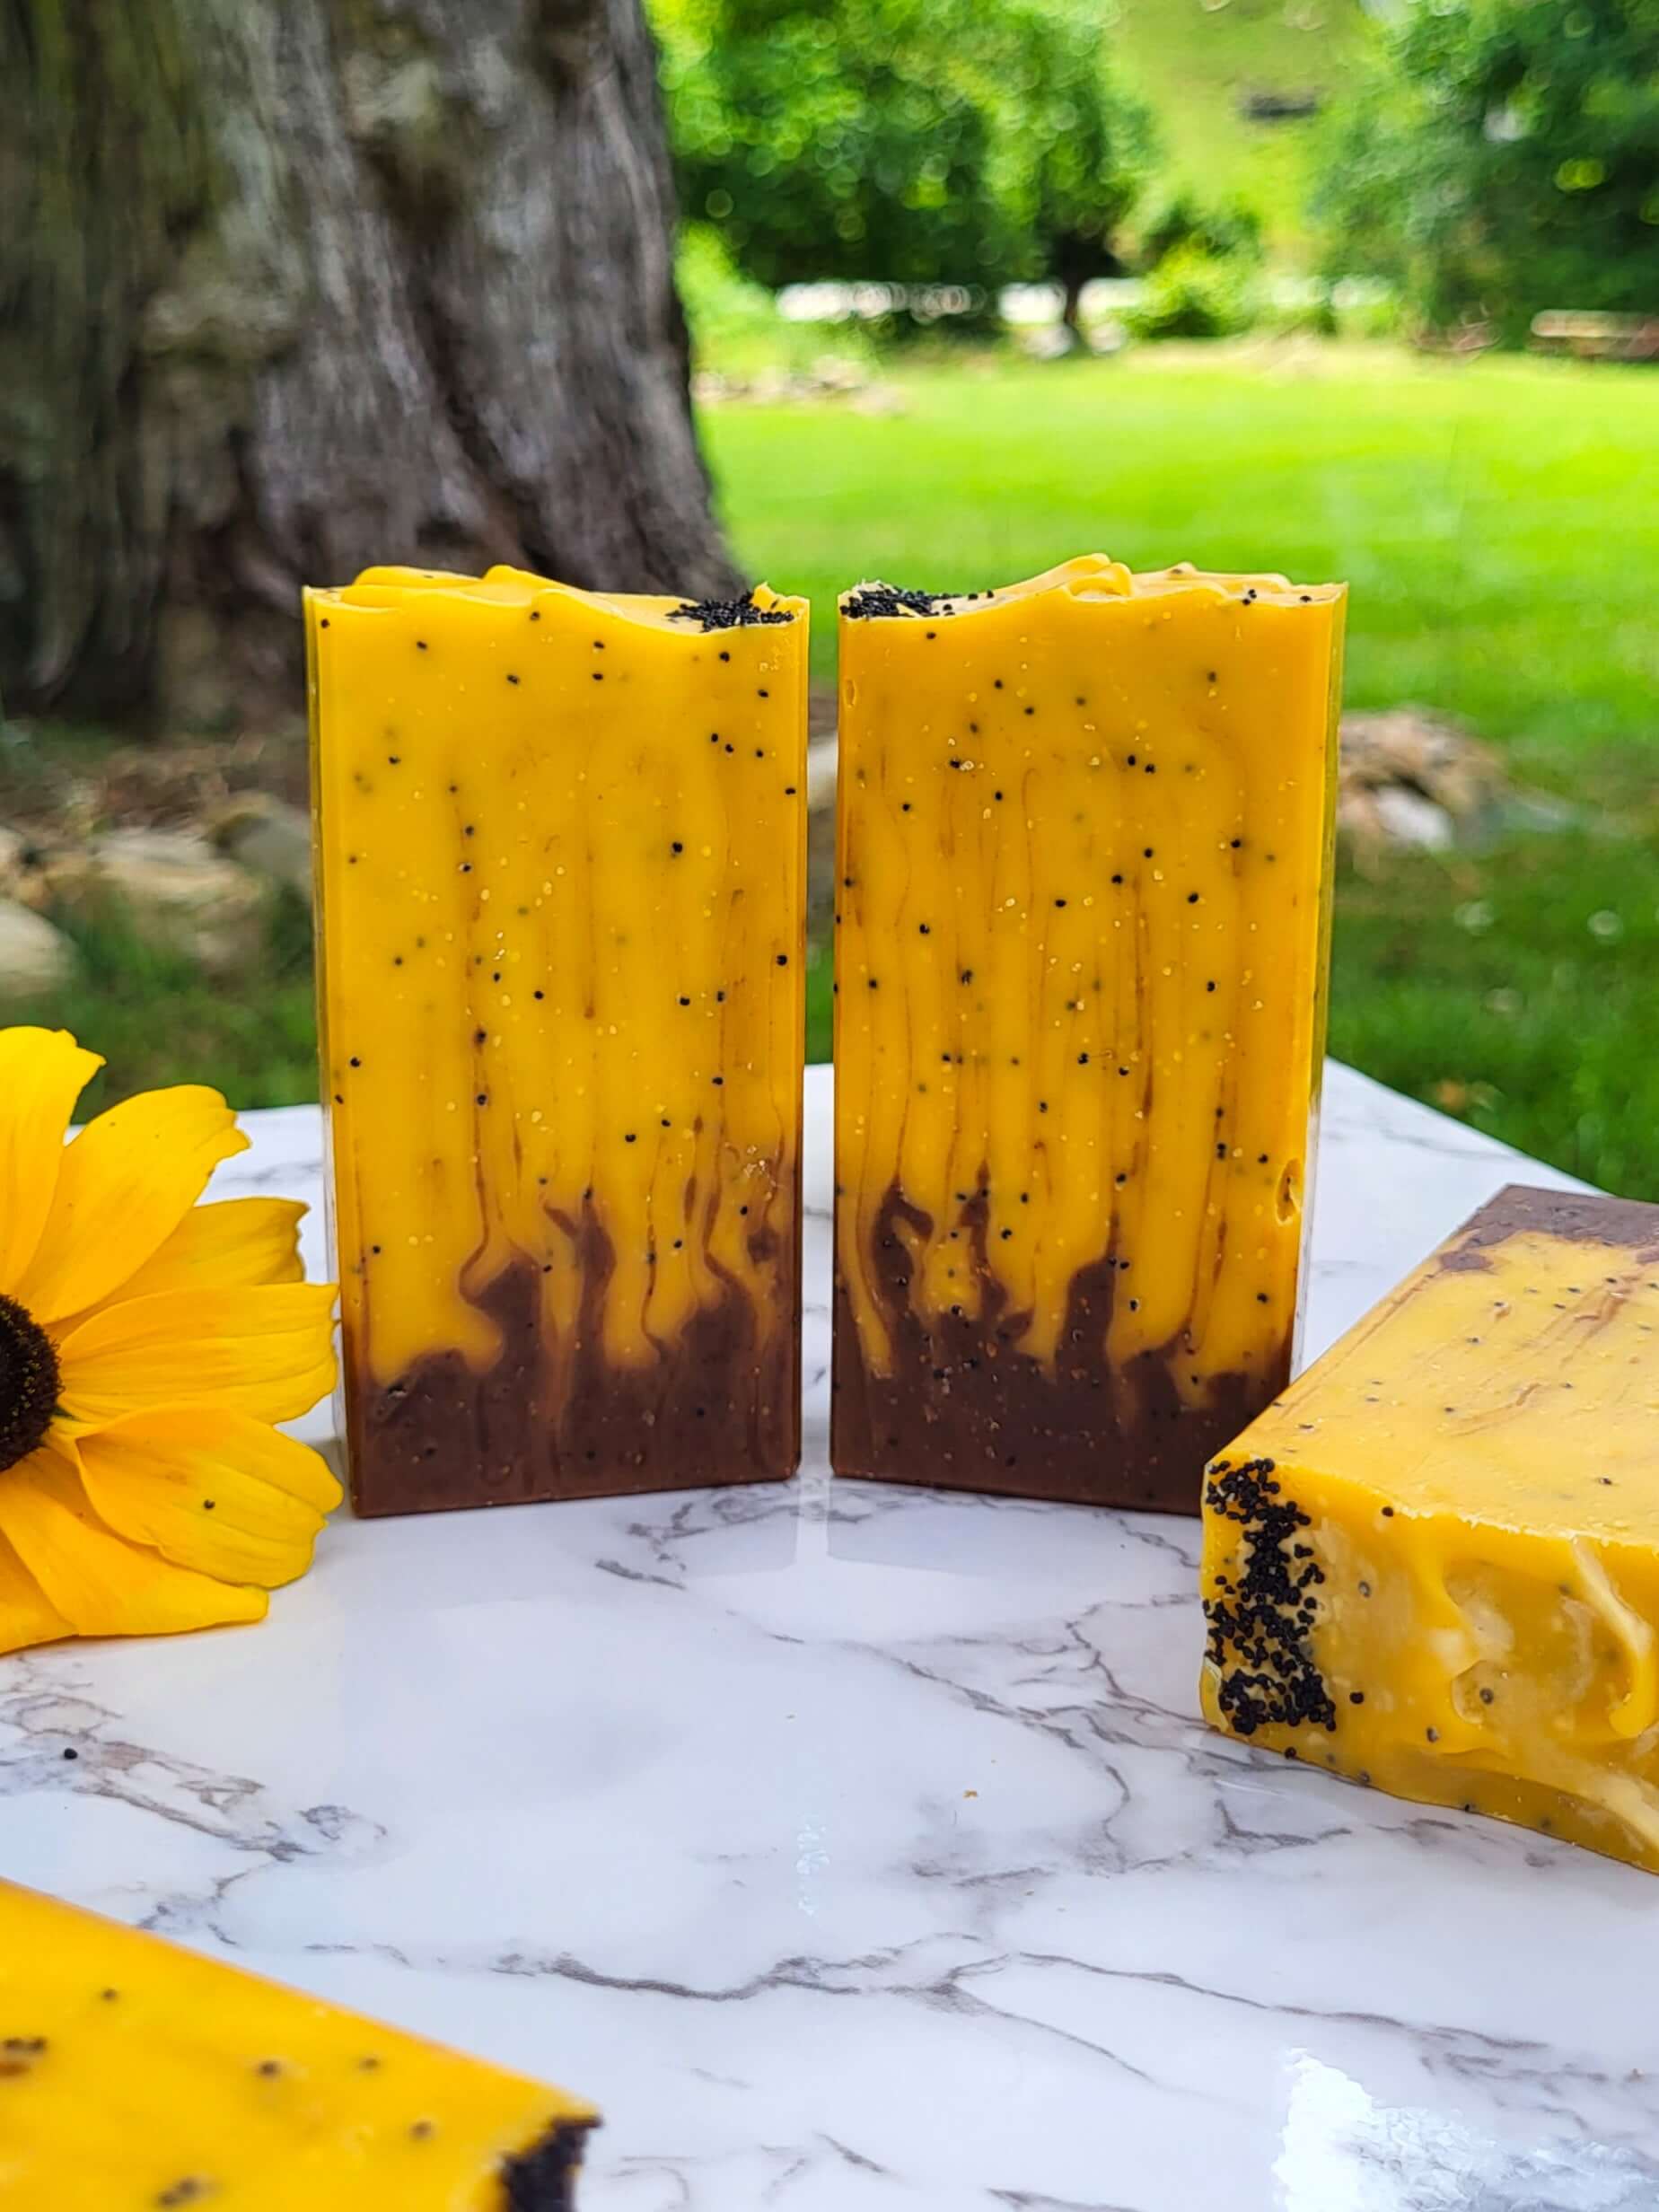 Cold process lard soaps that look like sunflowers